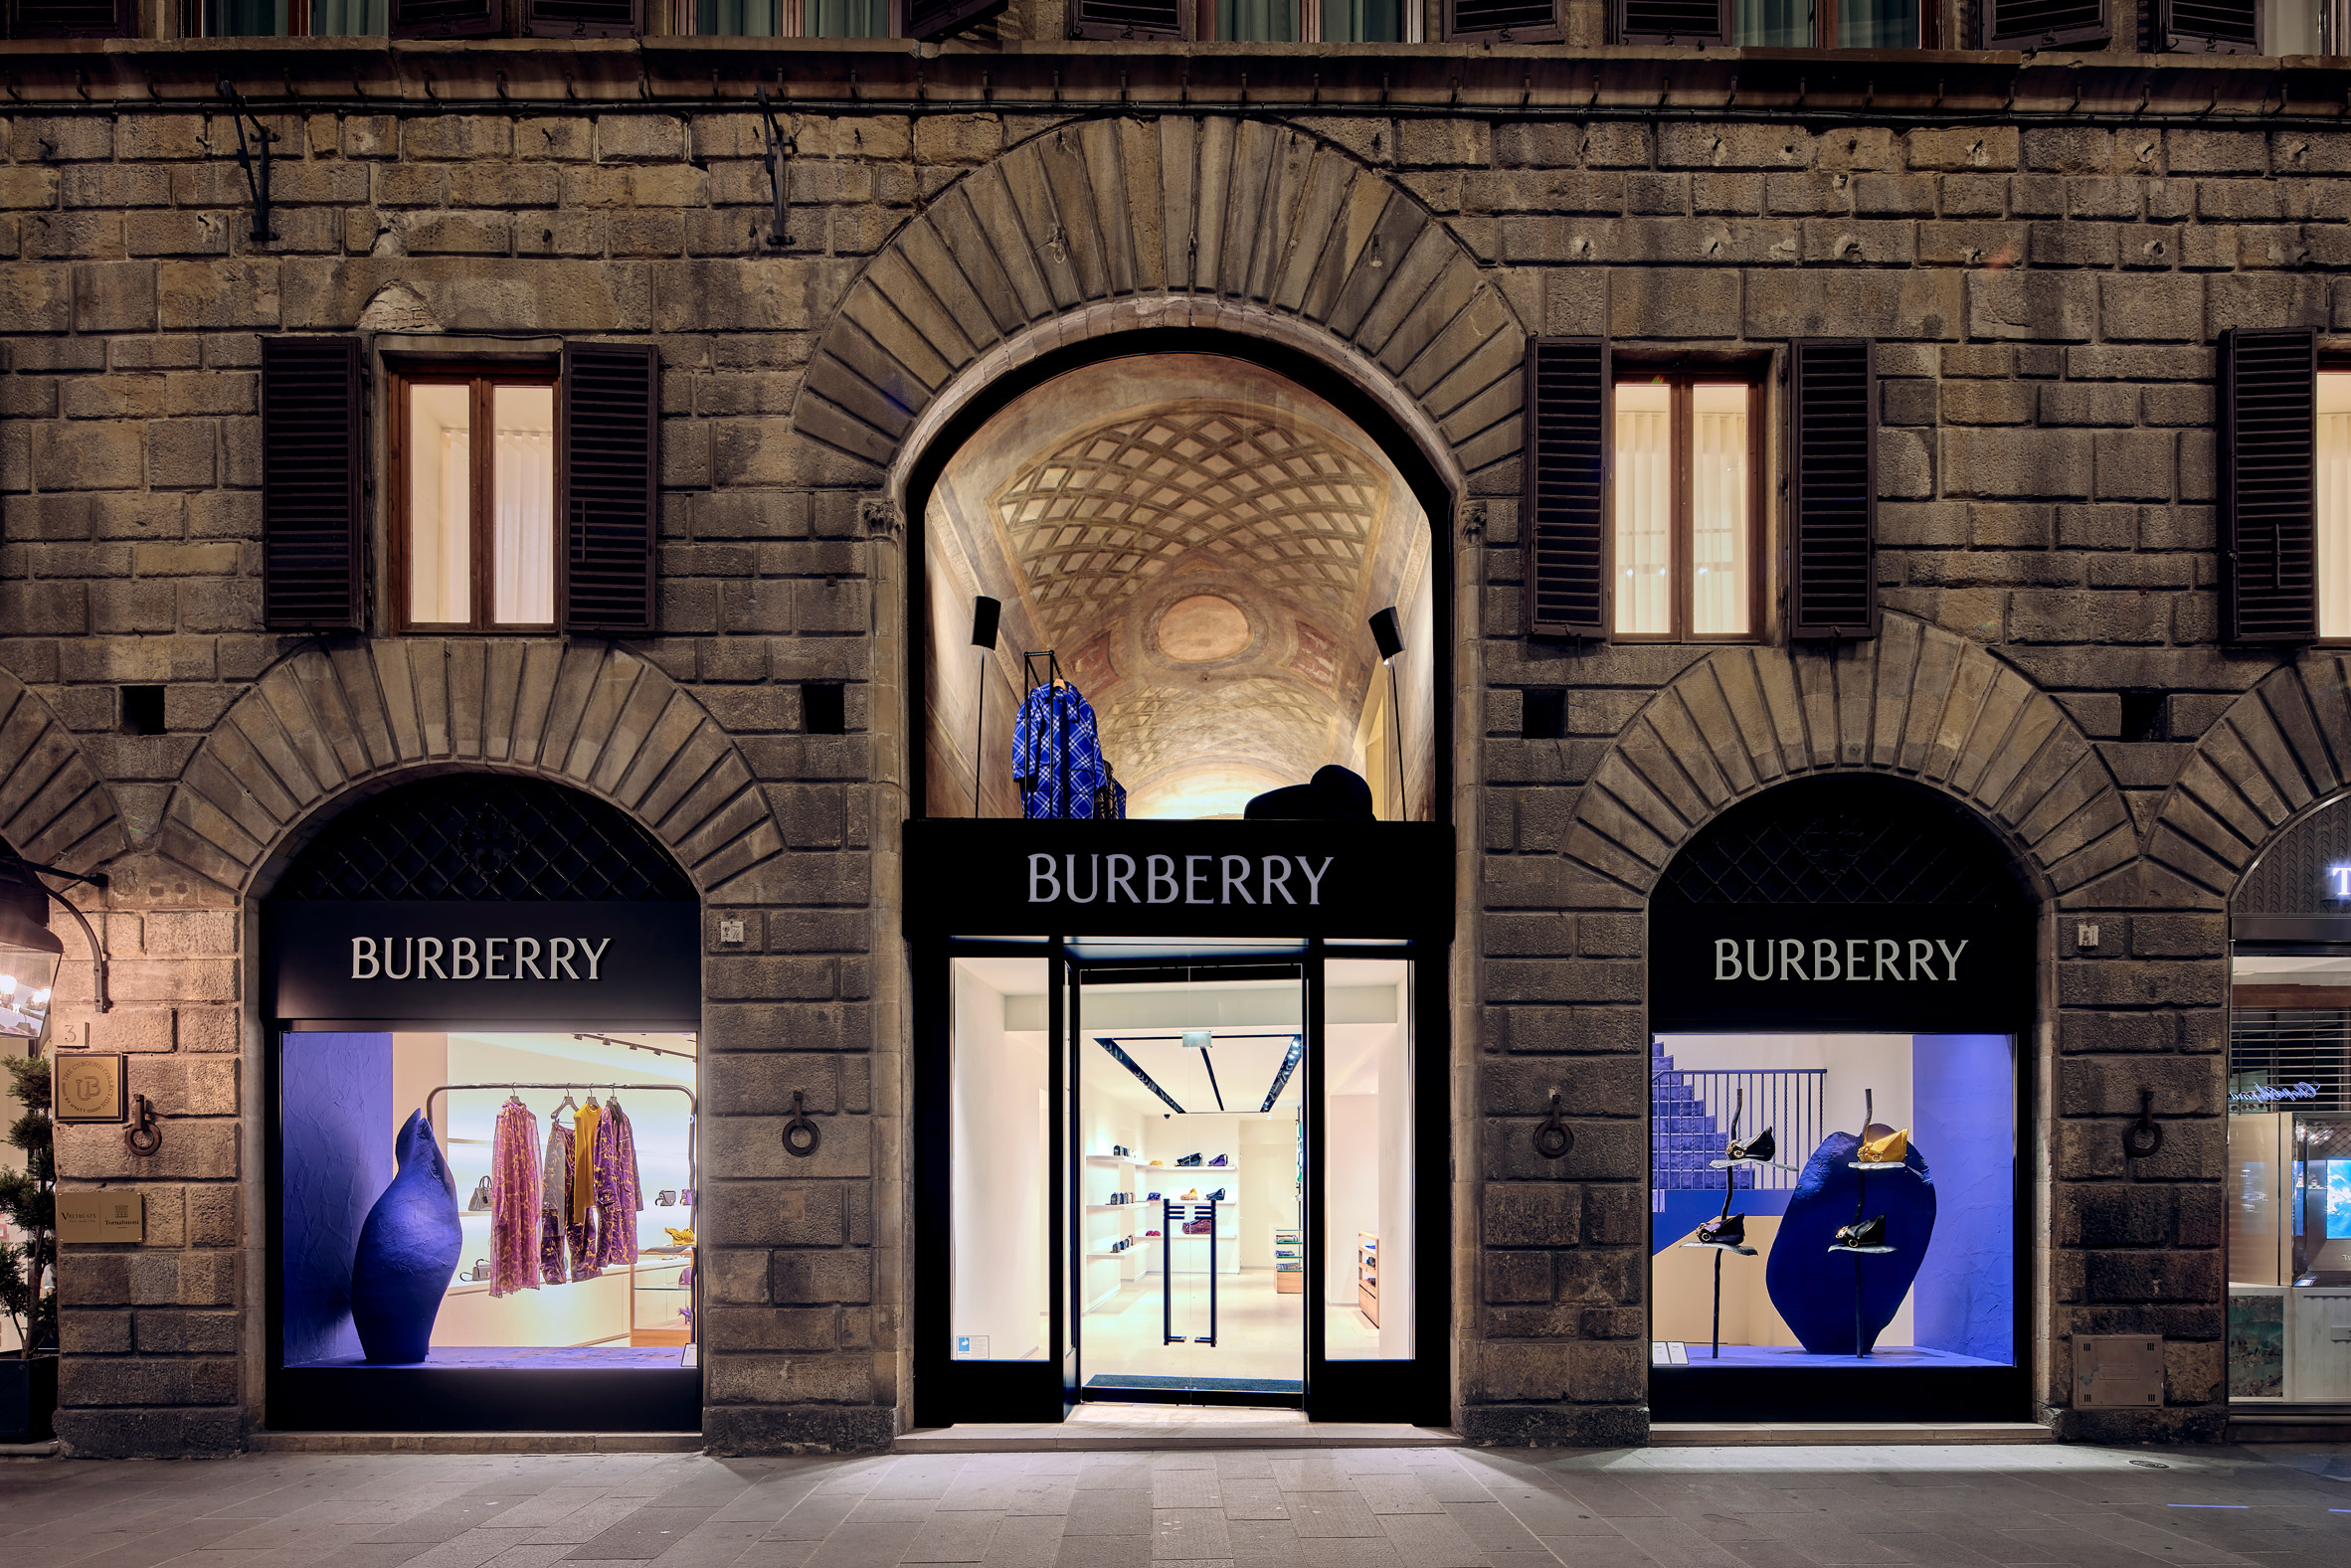 Photograph of exterior of Burberry store